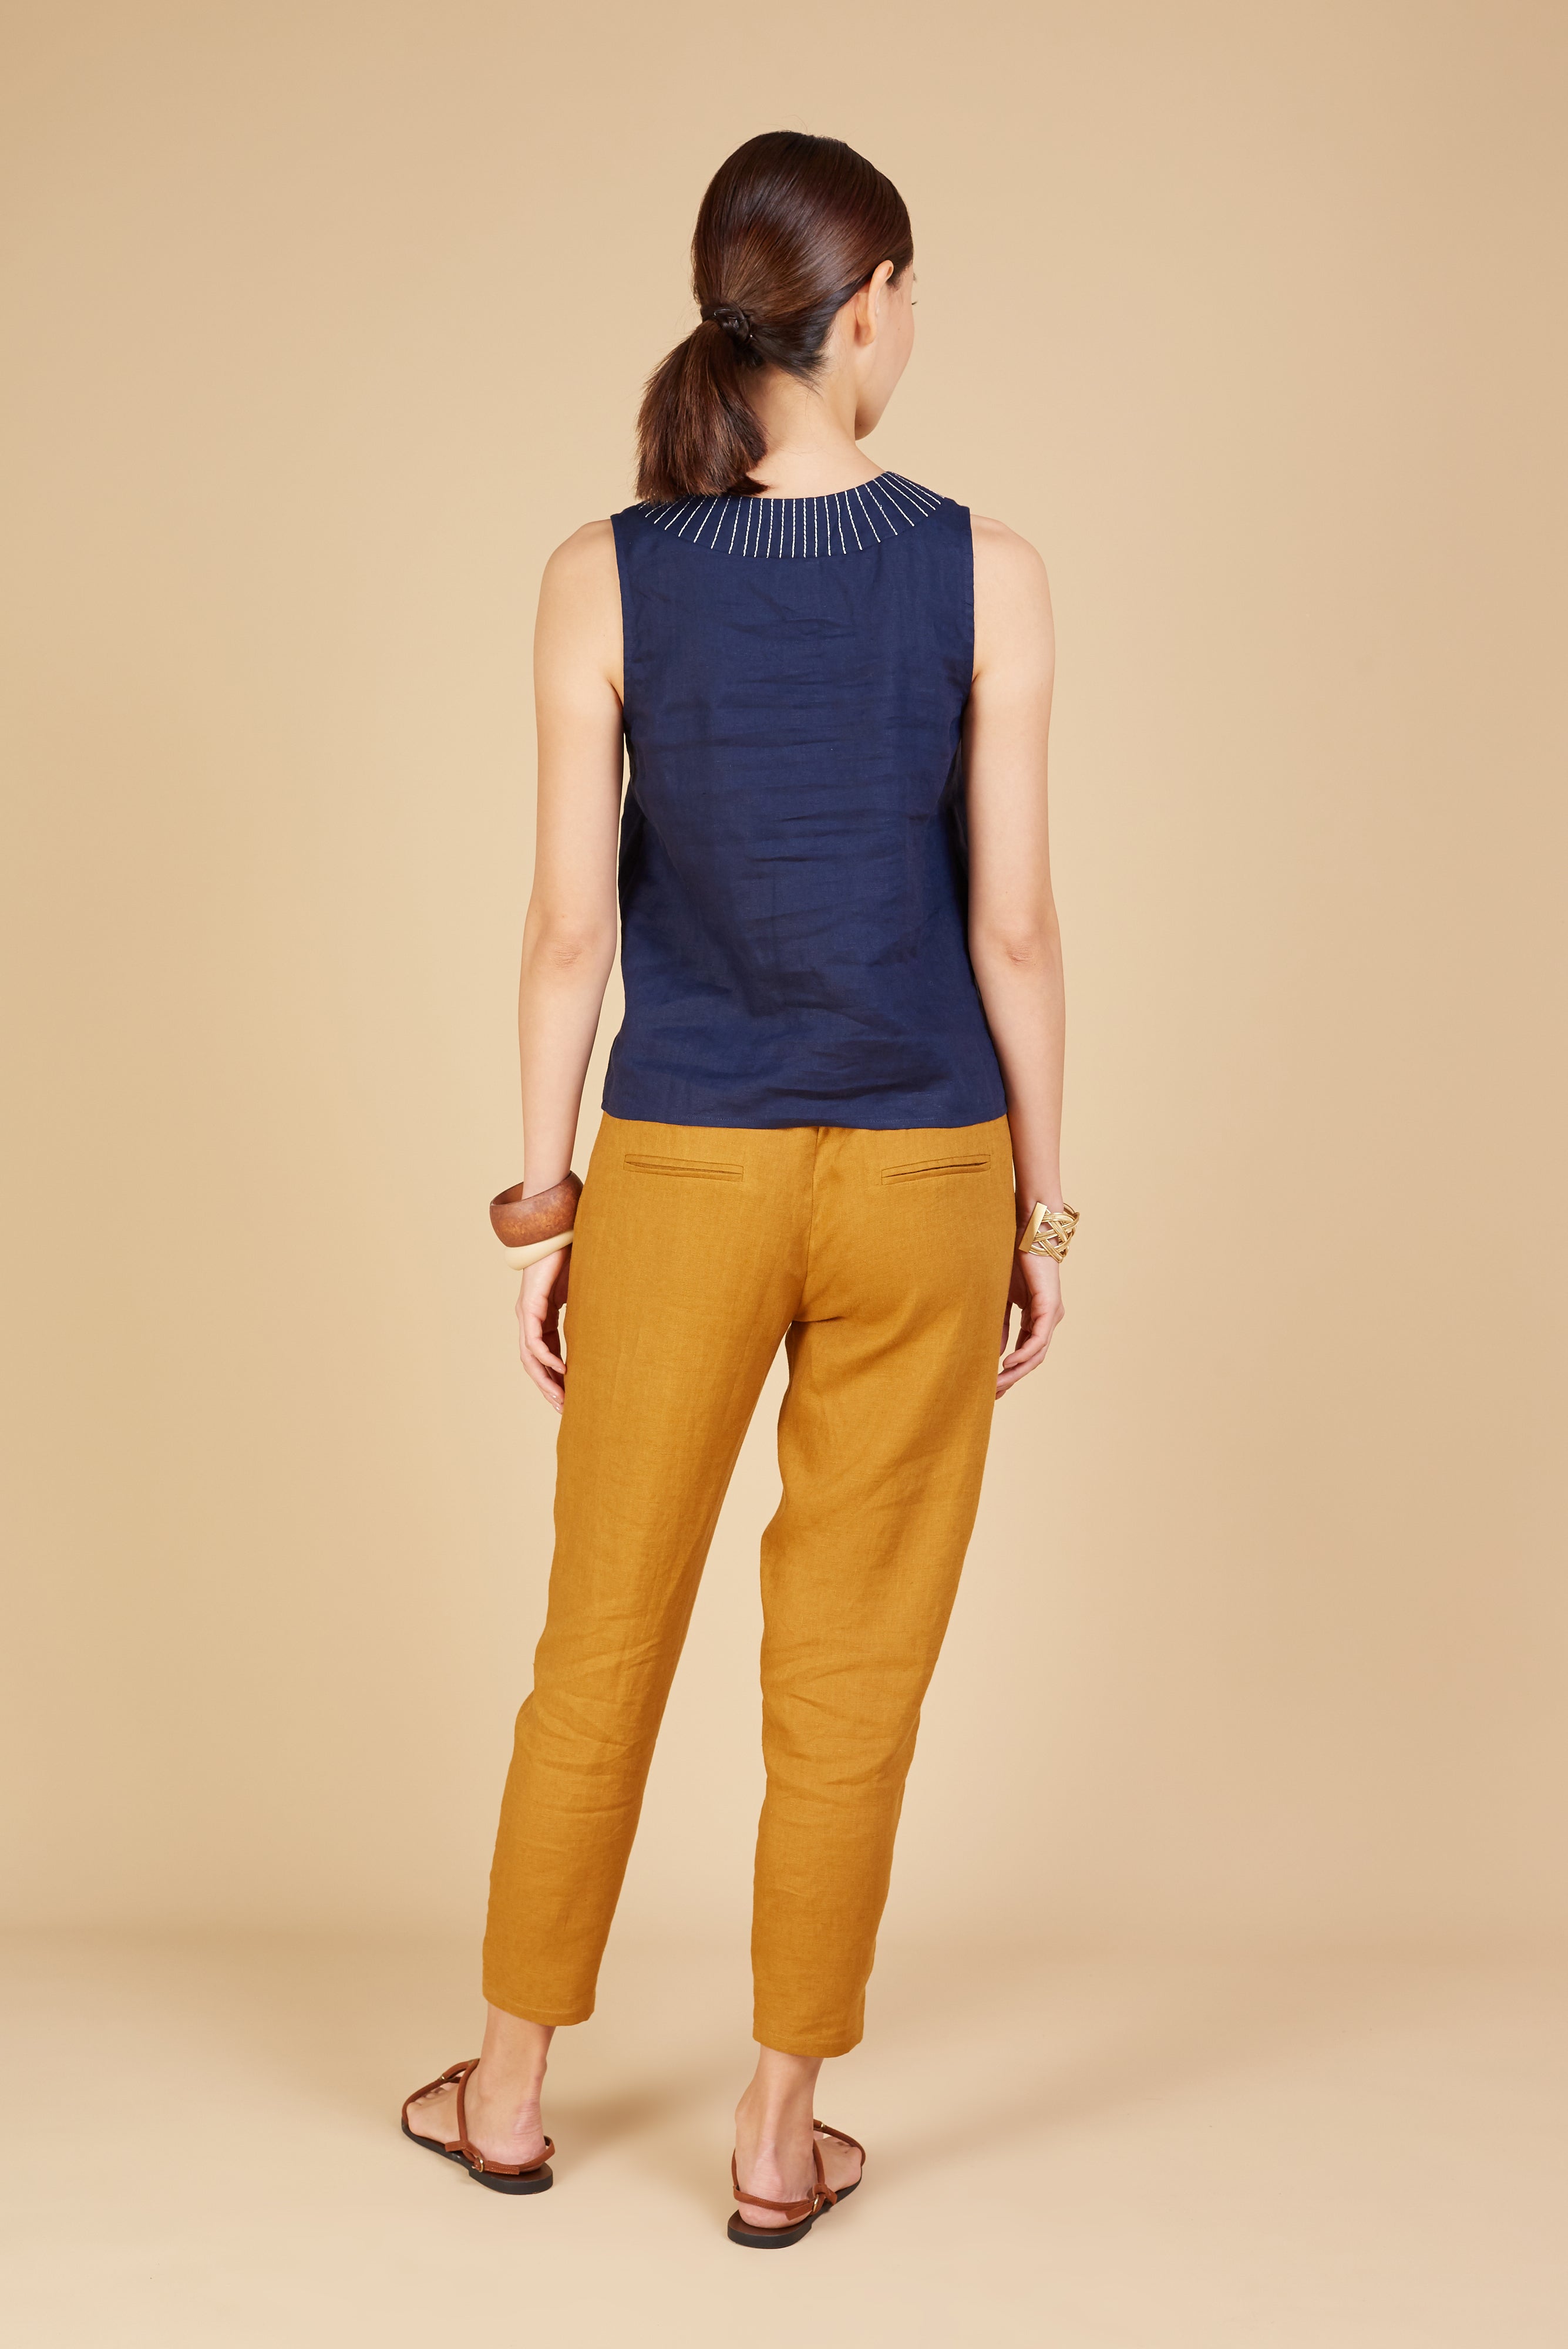 Narrow Fit Trousers - Buy Narrow Fit Trousers online in India